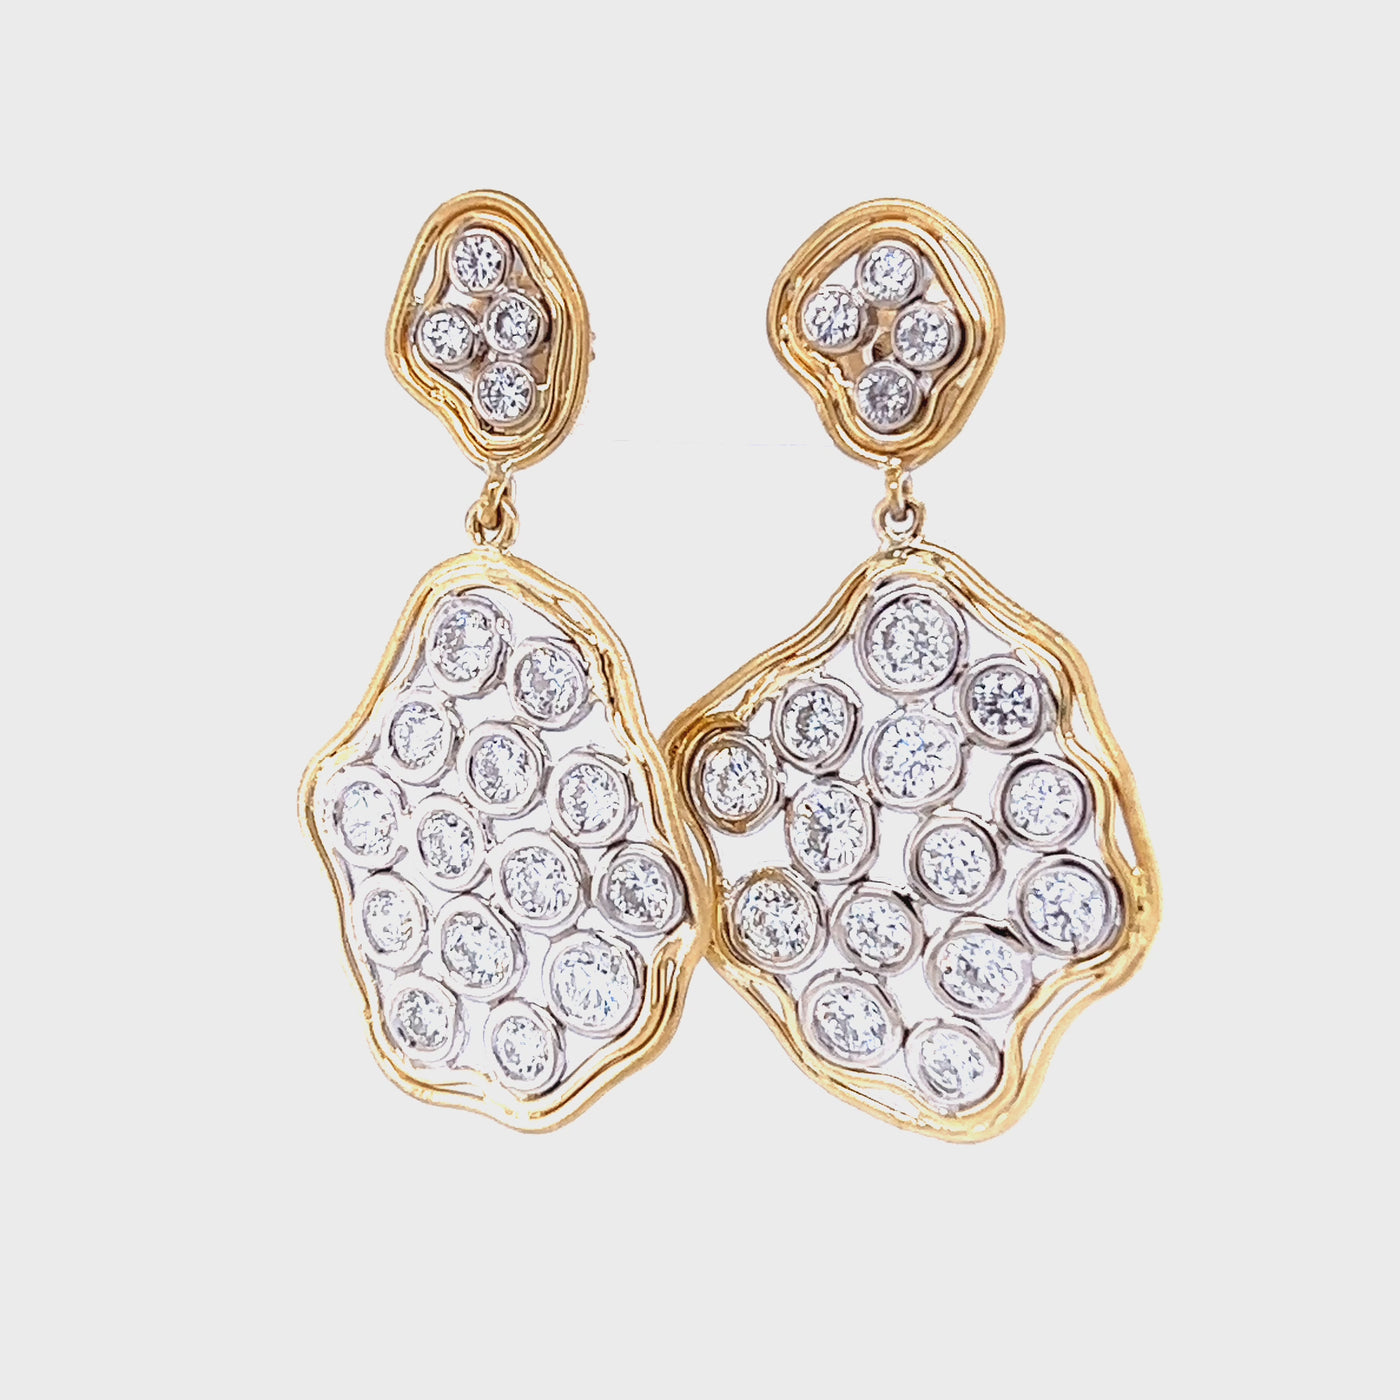 Custom 14k Two Tone Yellow and White Gold Diamond Drop Earrings by Paul Richter